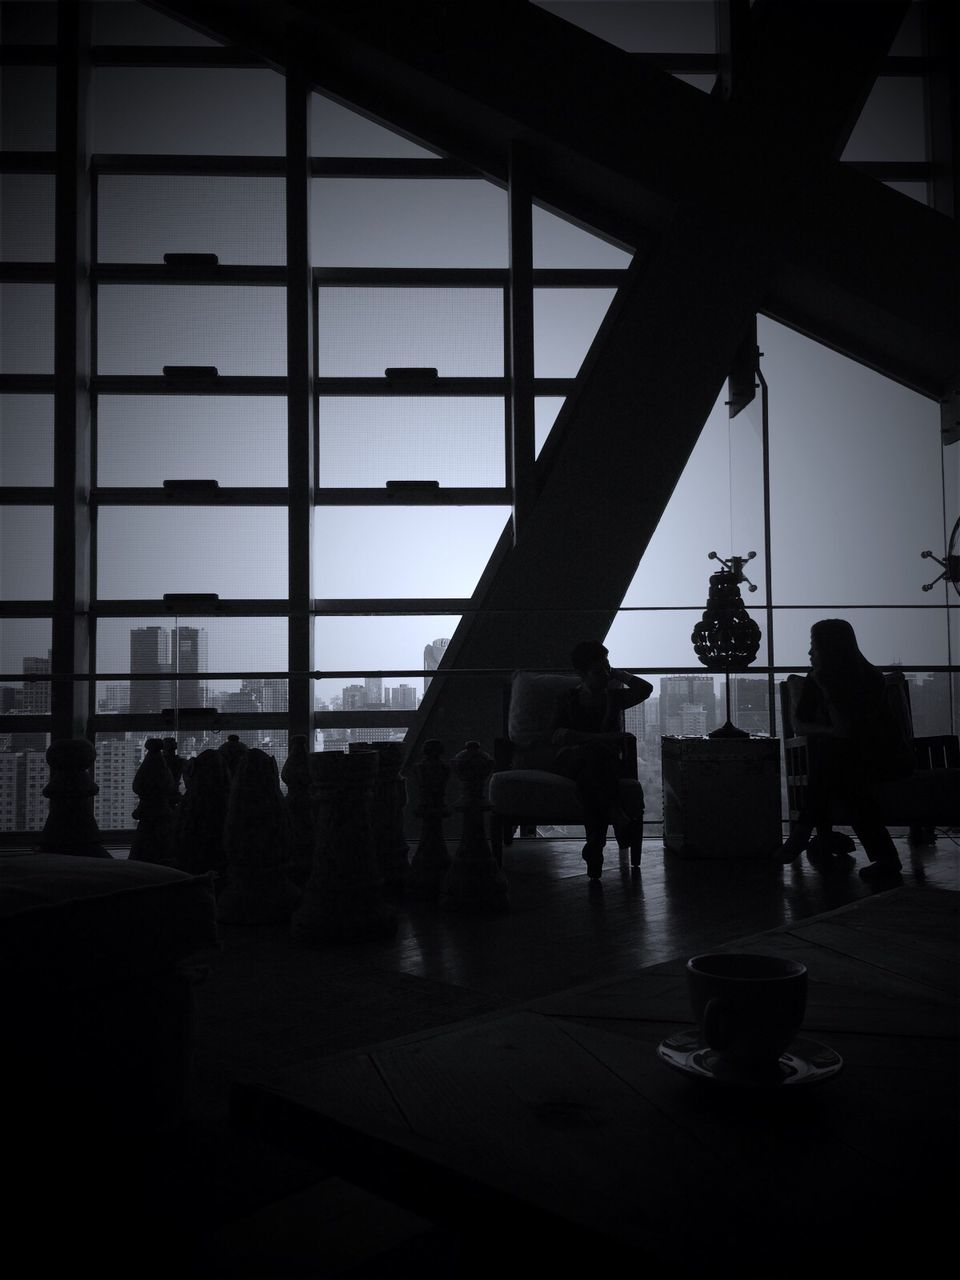 indoors, glass - material, silhouette, window, architecture, built structure, transparent, men, lifestyles, person, leisure activity, sky, medium group of people, reflection, incidental people, glass, airport, table, sunlight